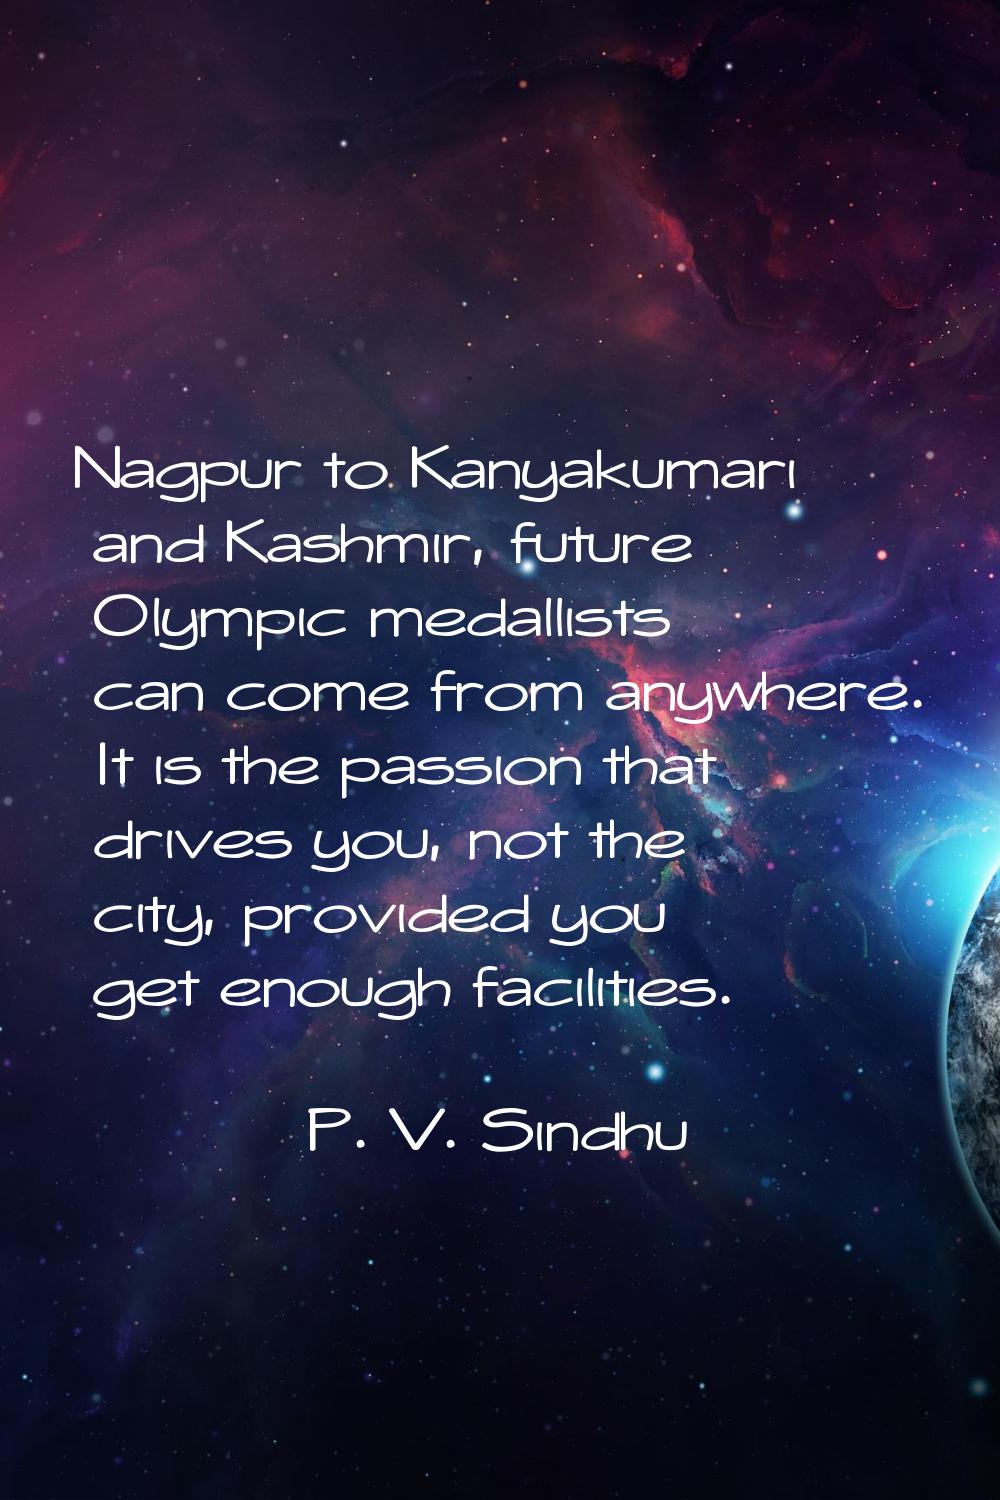 Nagpur to Kanyakumari and Kashmir, future Olympic medallists can come from anywhere. It is the pass